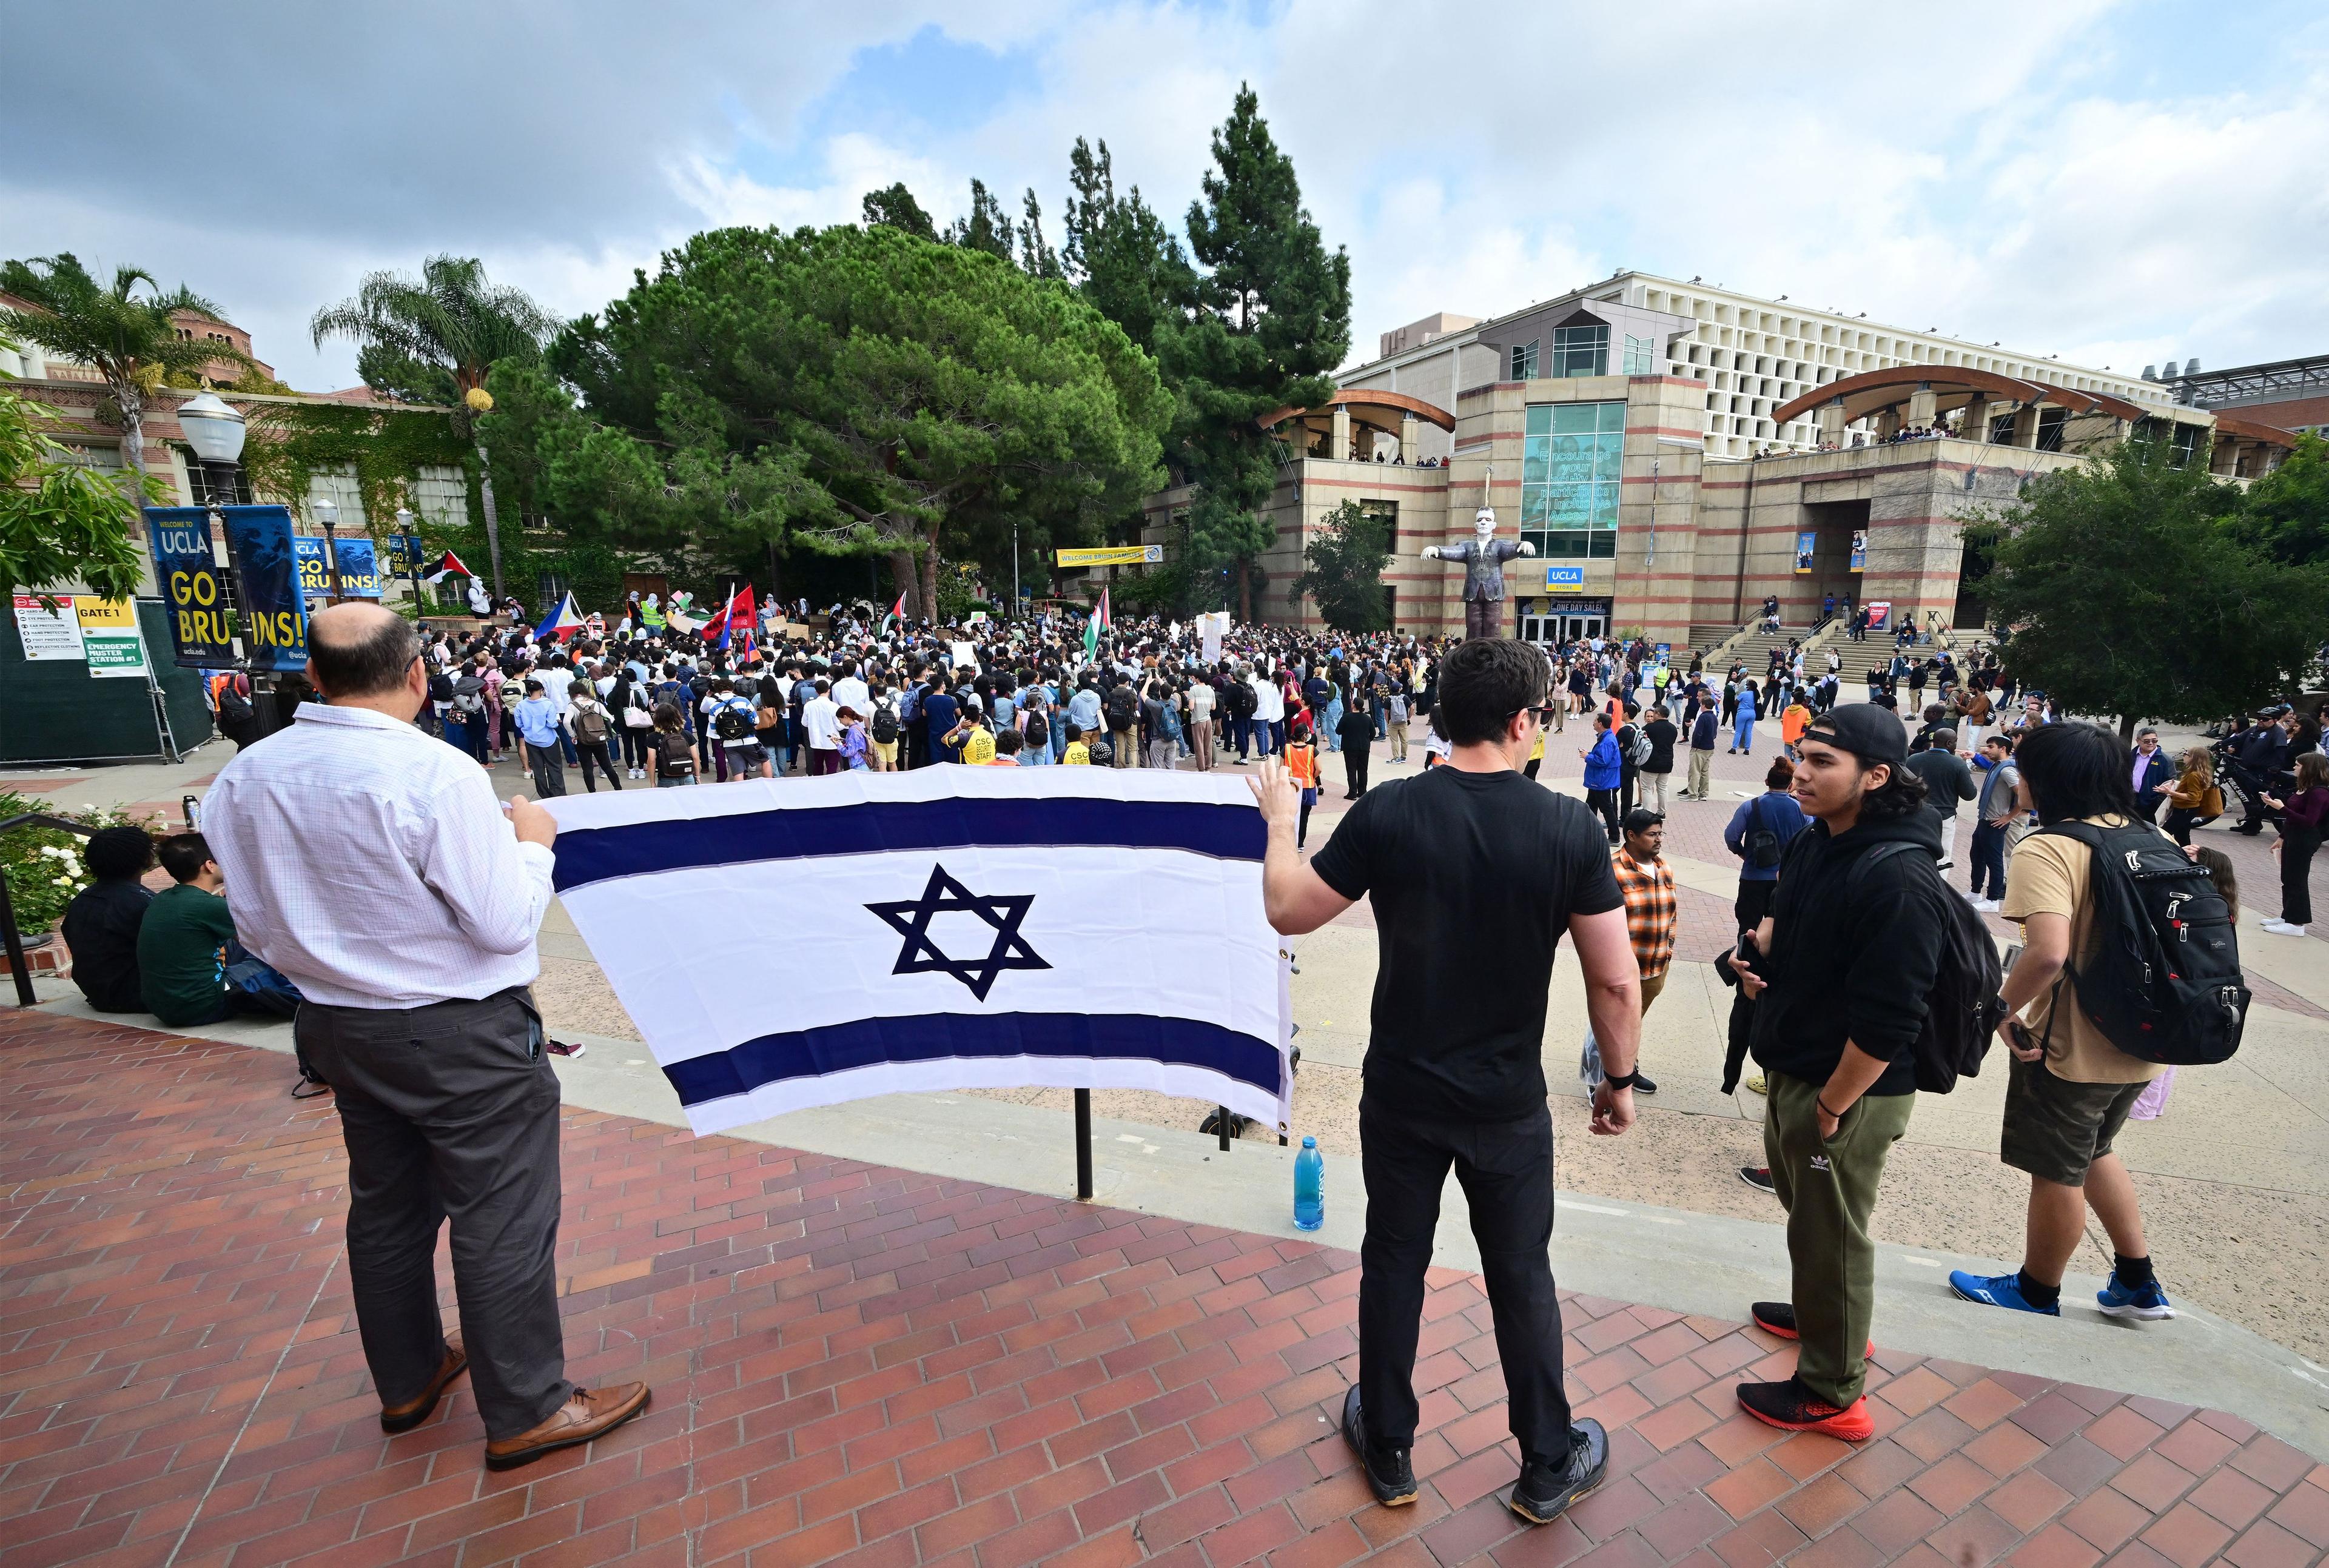 UC Leaders Stand by Their Condemnation of Oct. 7 Hamas Attack on Israel